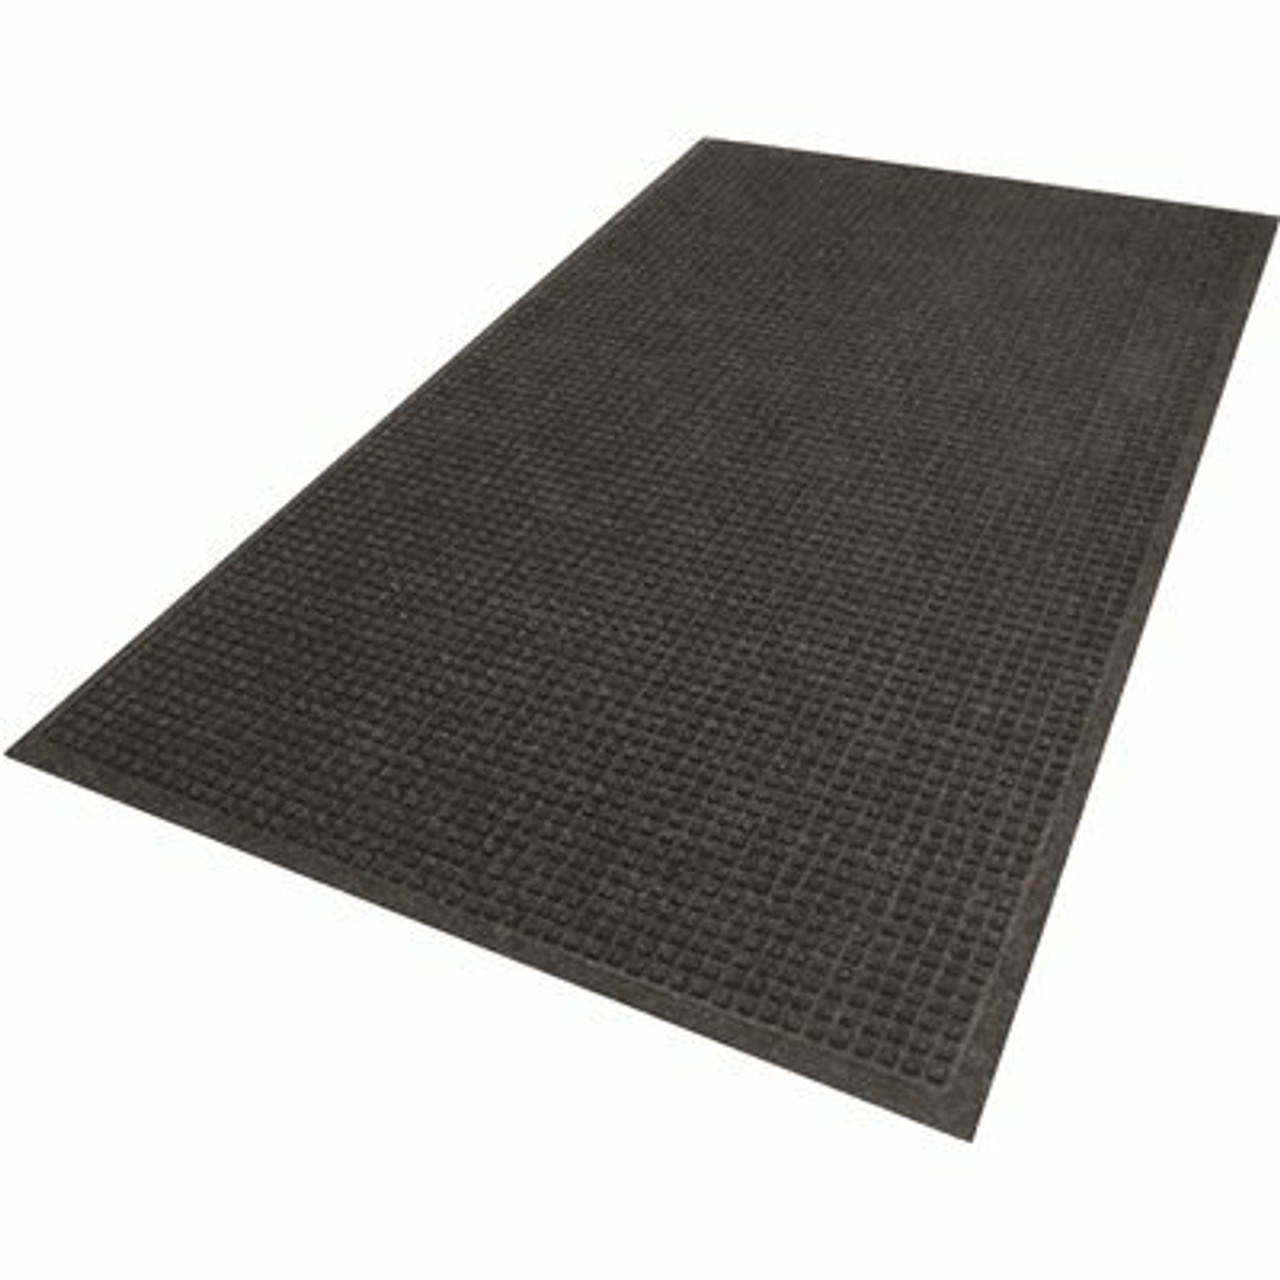 M+A Matting Waterhog Fashion Charcoal 59 In. X 35 In. Commercial Floor Mat